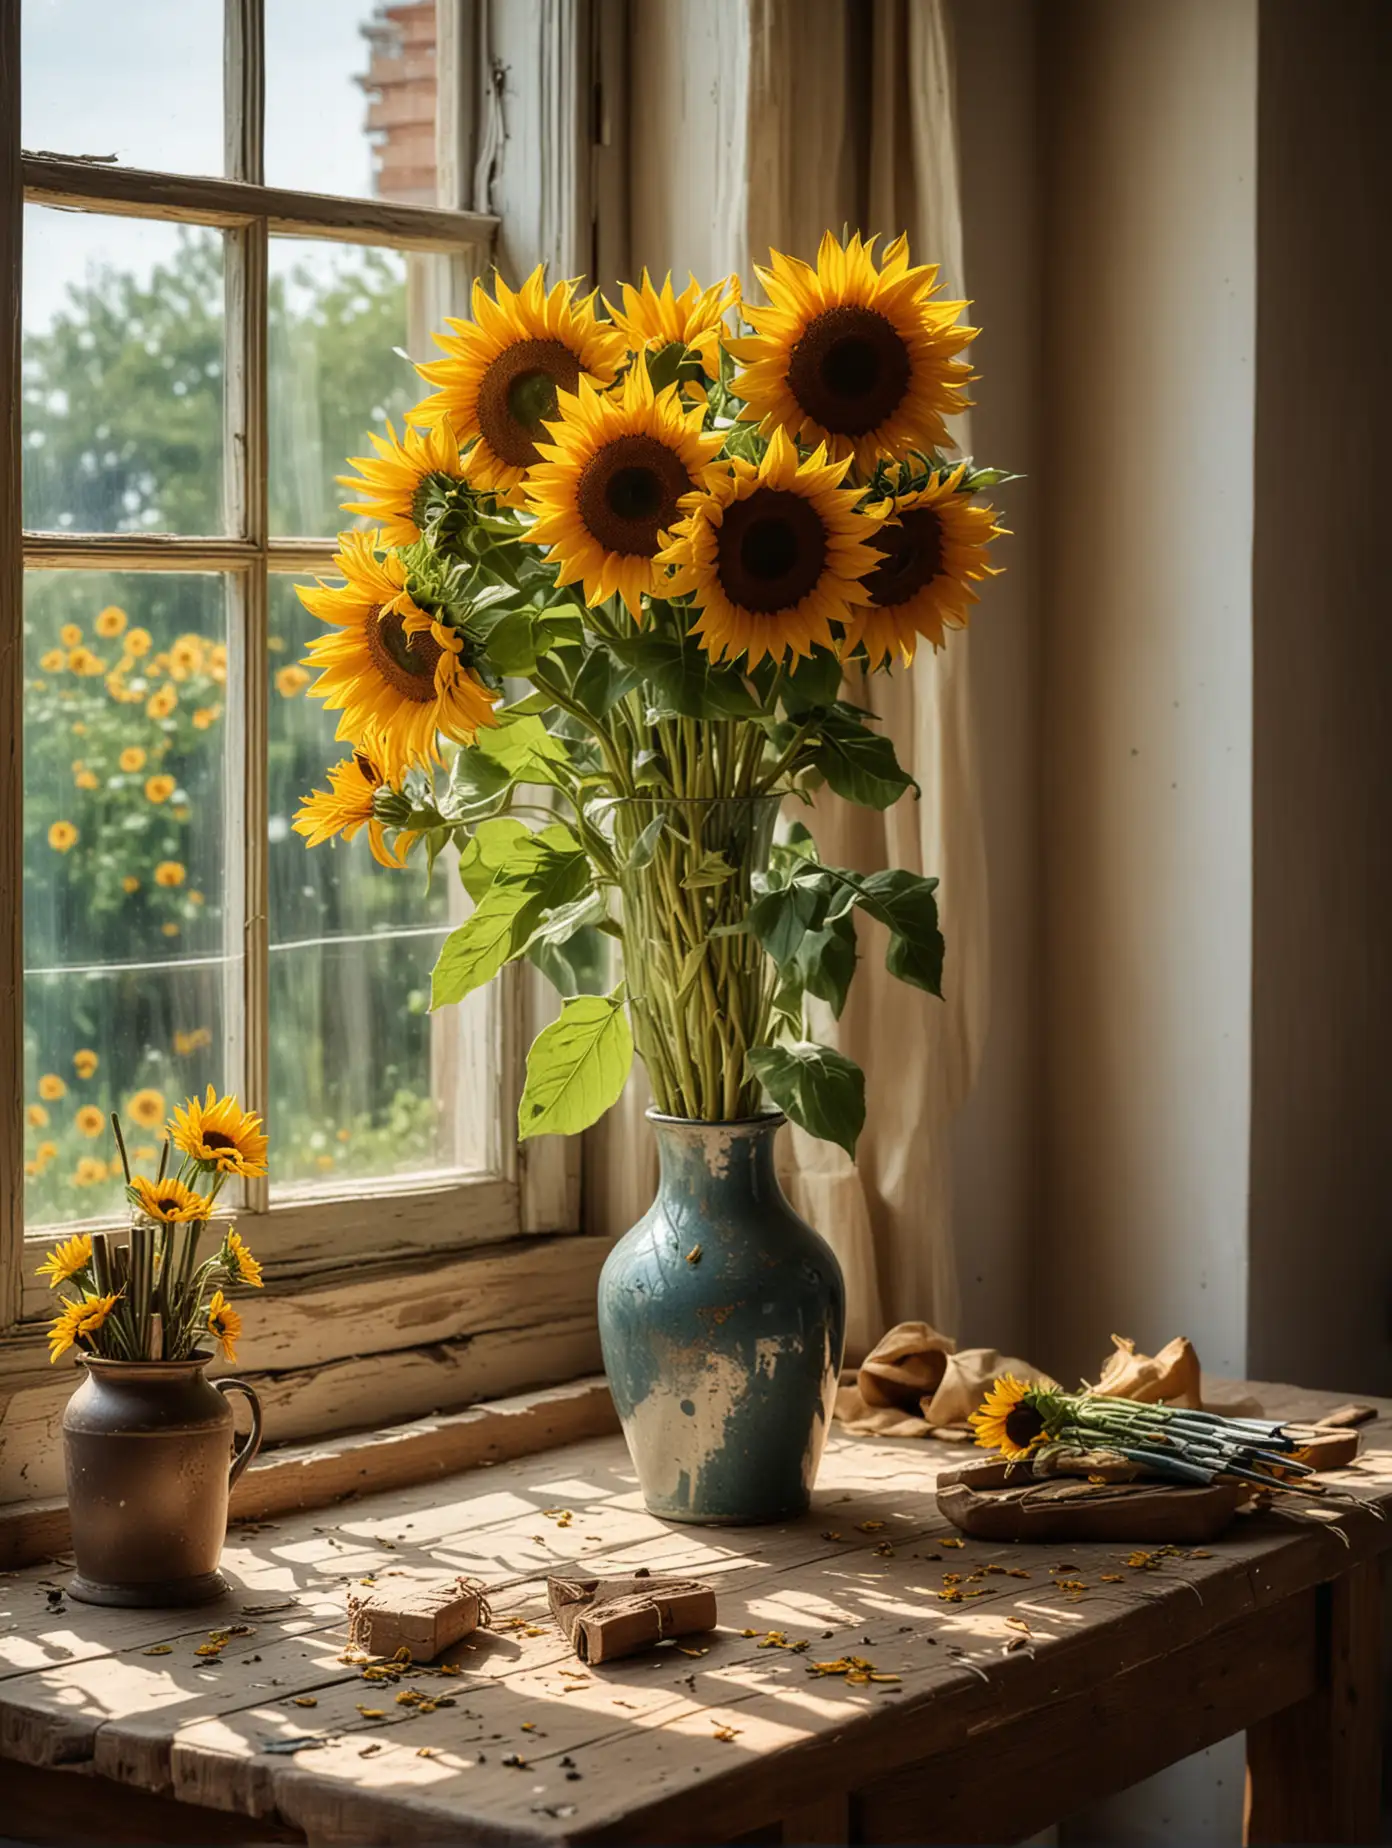 to look like a van gogh painting create a still life of vase with sunflowers in a country living room on an old wooden table with cutting accessories and a 3 sunflower stems lying alongside the vase behind a large window and showing the a sizeable portion side wall allowing for the sunlight in the morning